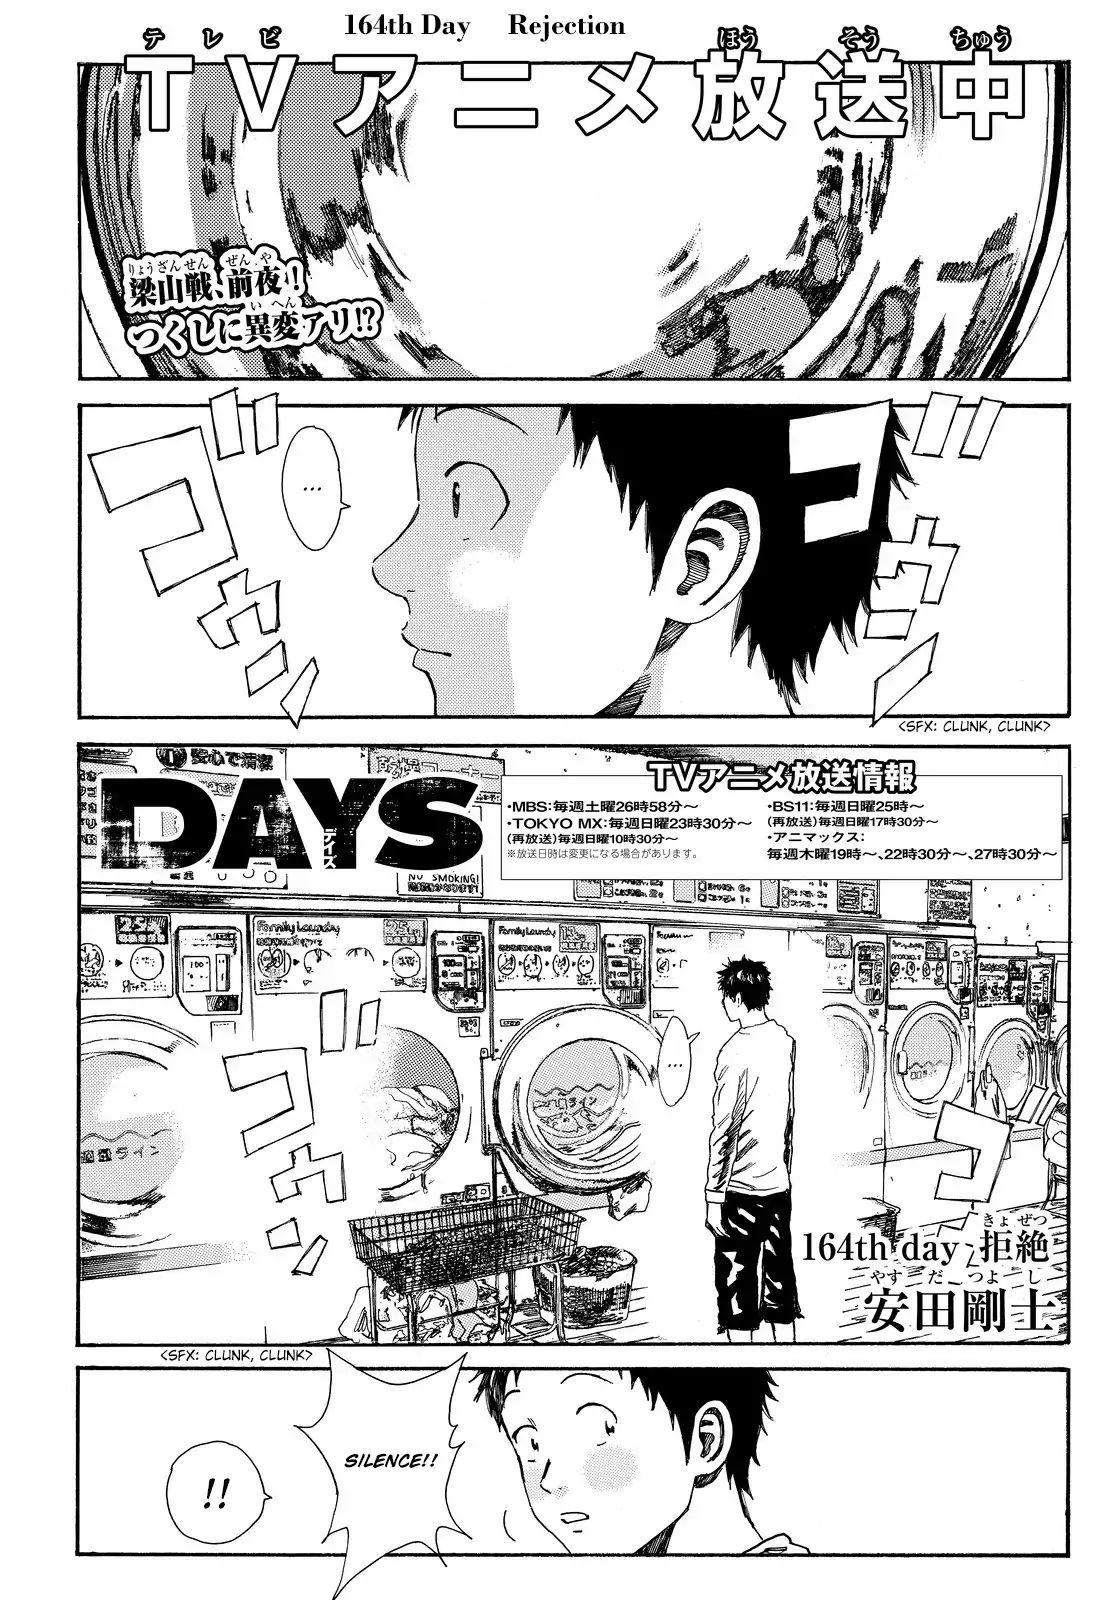 Read Days Days Chapter 164 : Rejection 1